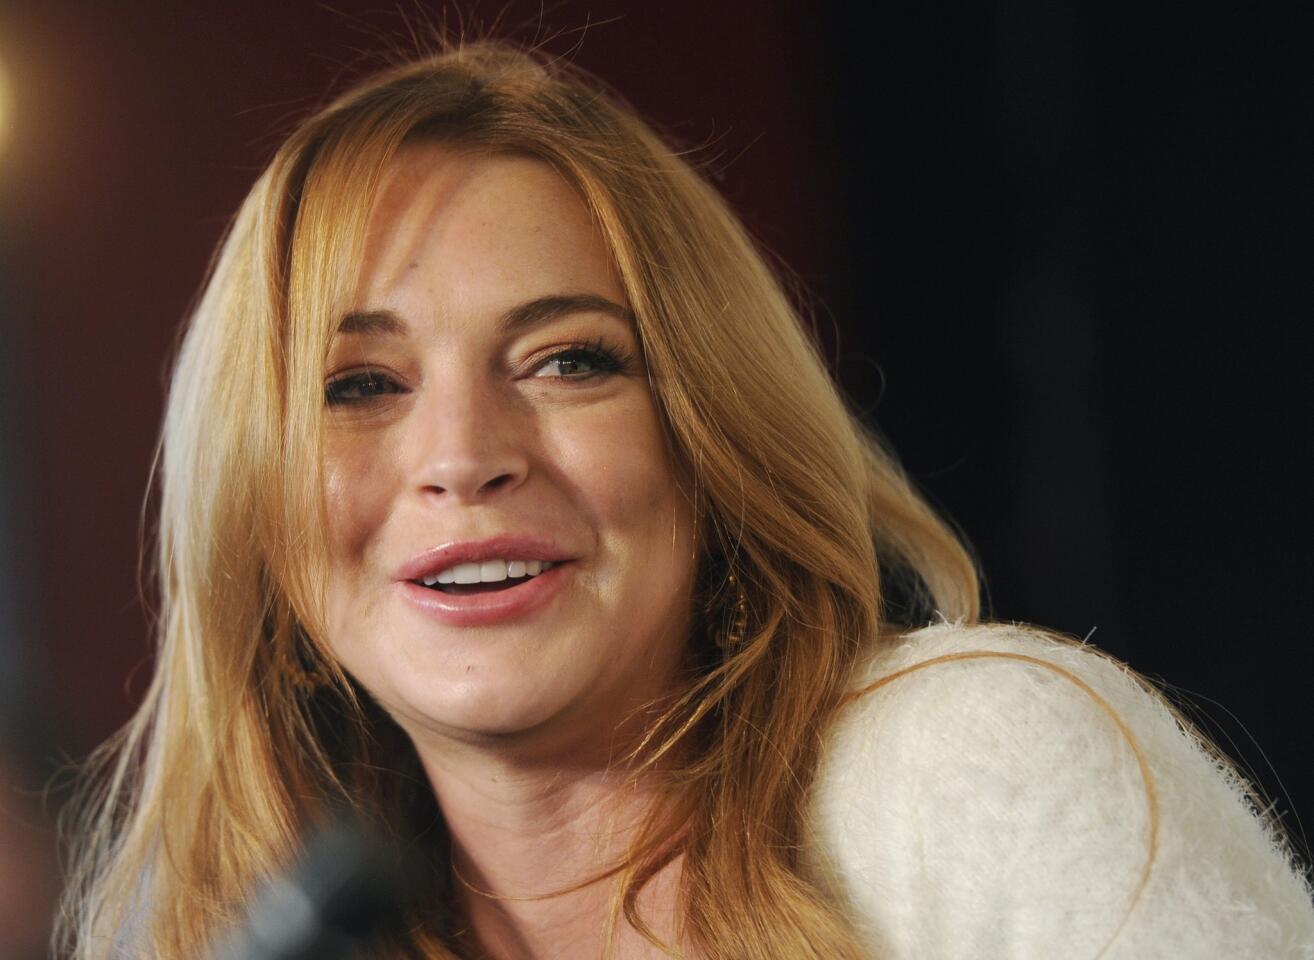 Lindsay Lohan says she suffered a miscarriage during docu-series